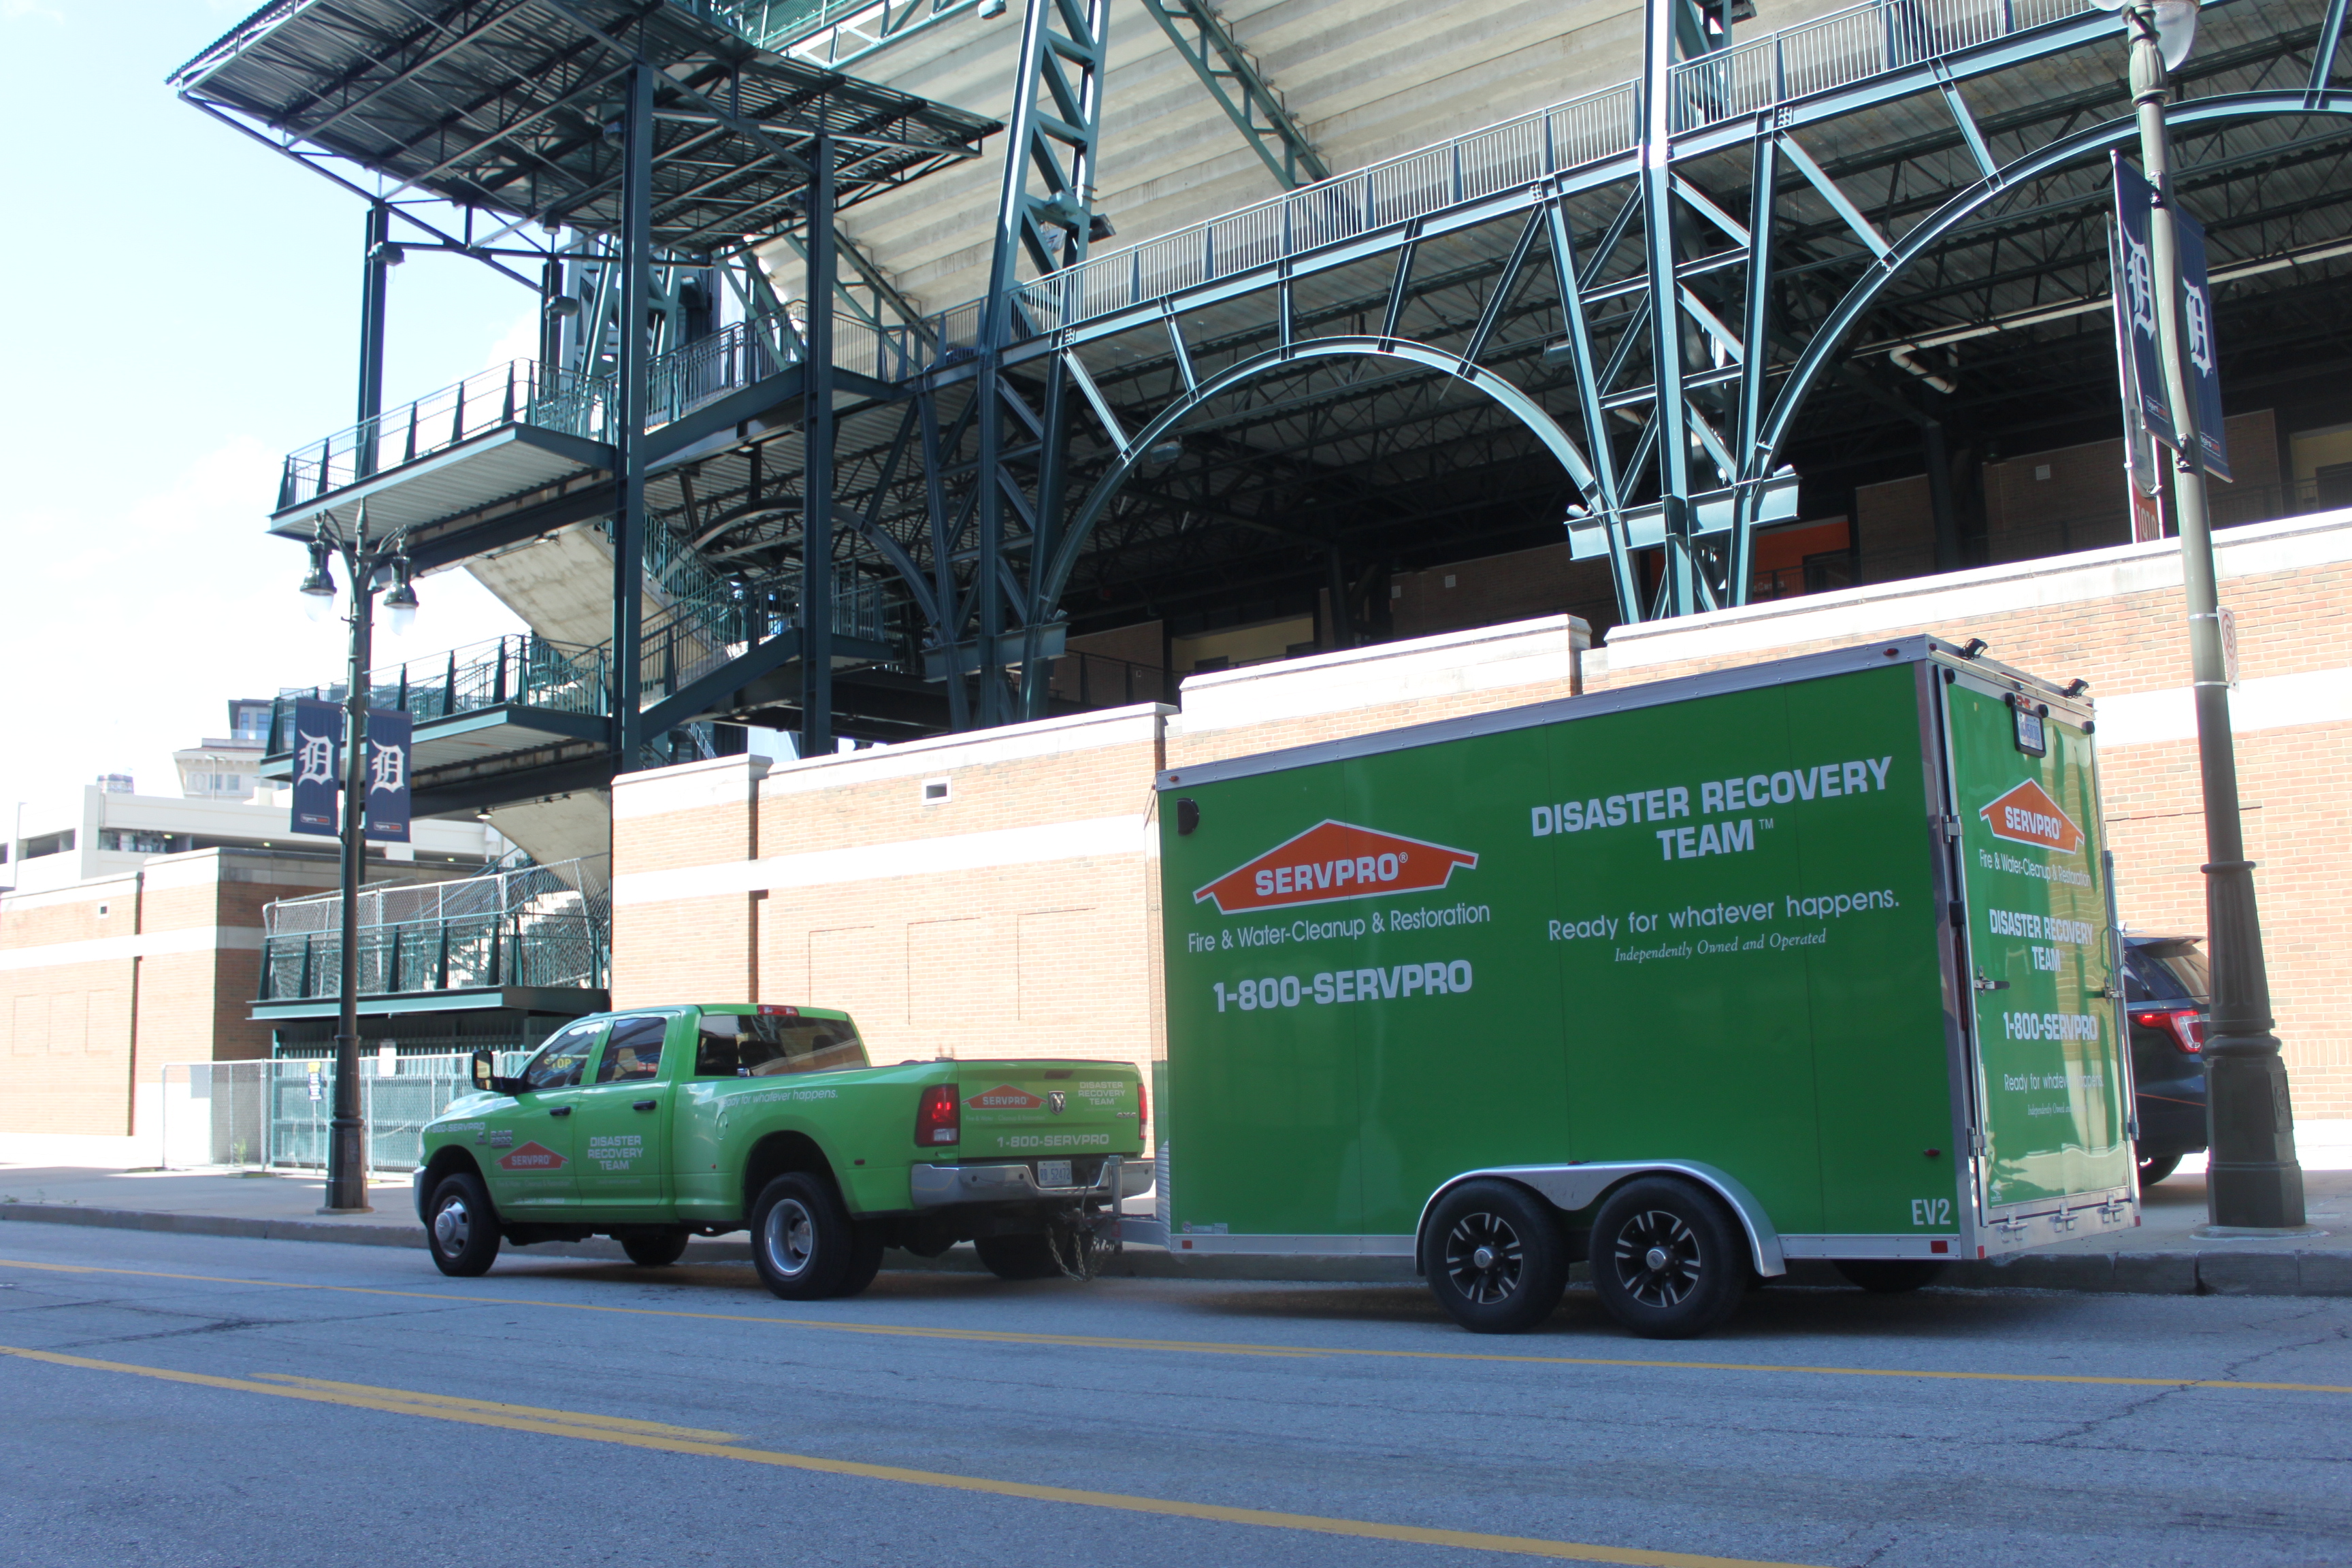 SERVPRO of New Center/Highland Park loves to represent the #greenteam. When you see our green trucks and trailers, you know someone in the area is receiving quality service!